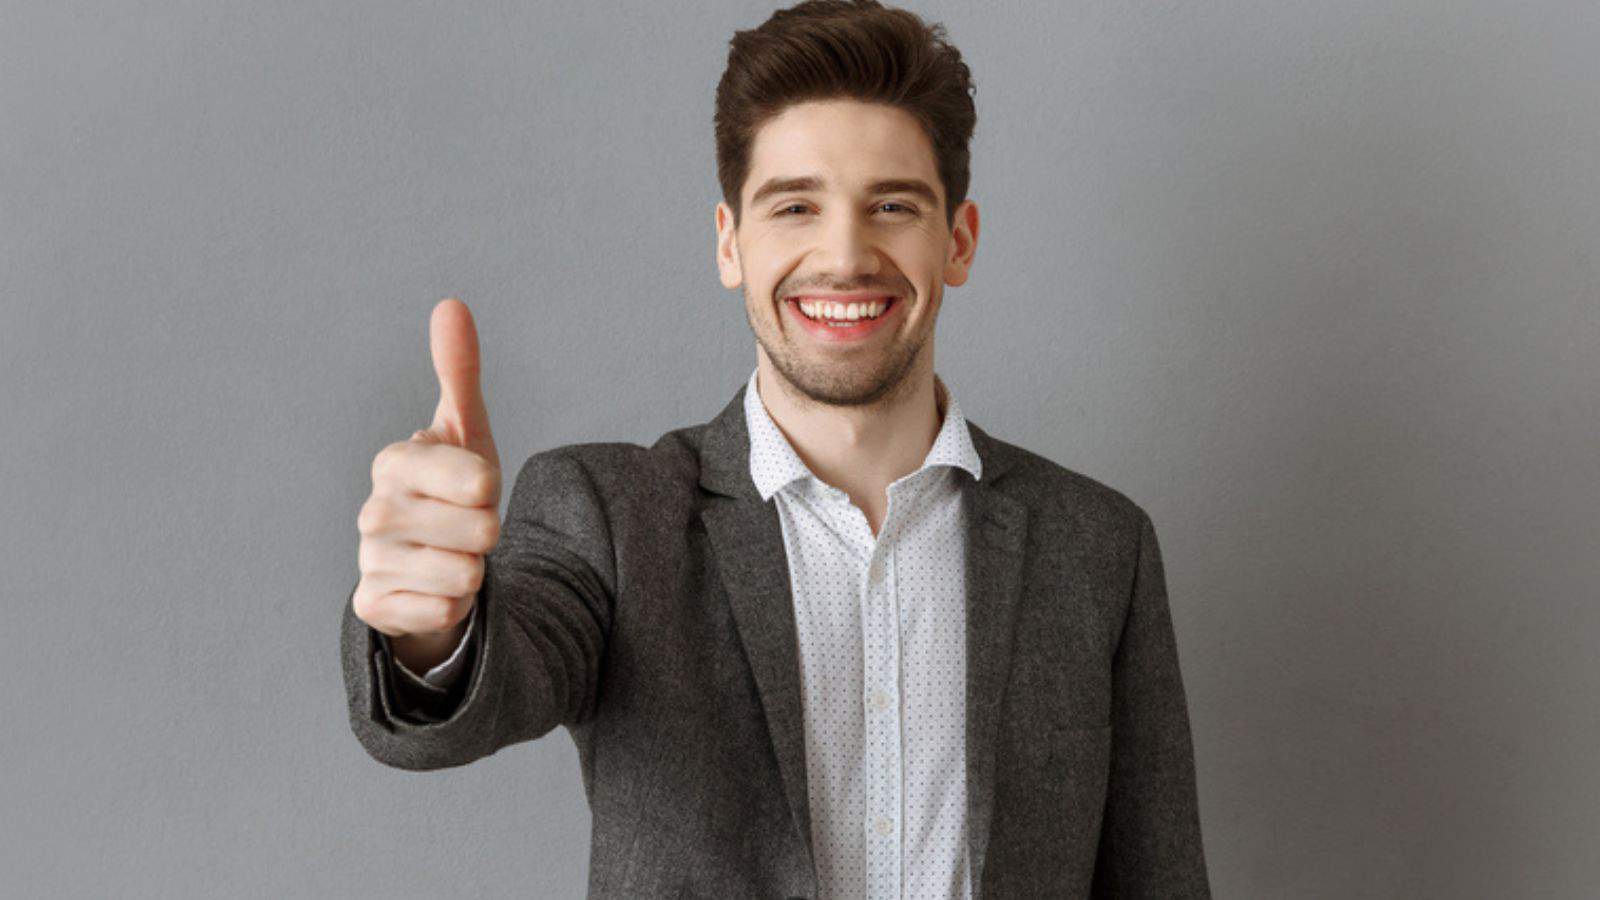 Portrait of smiling businessman in suit showing thumb up